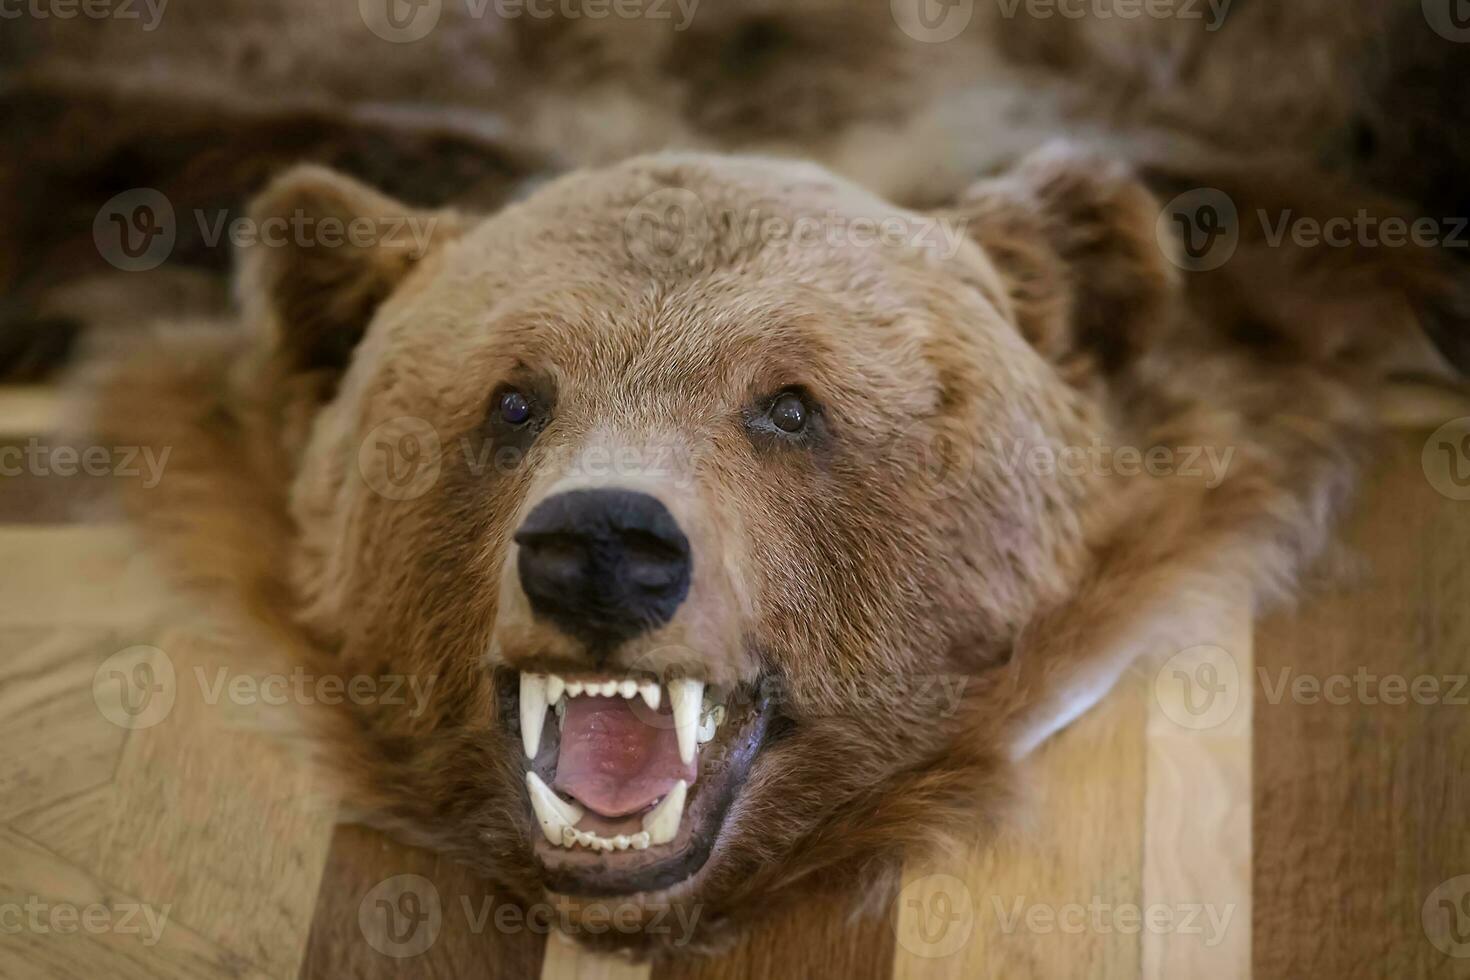 The head of a stuffed bear with a bared mouth and fangs. photo